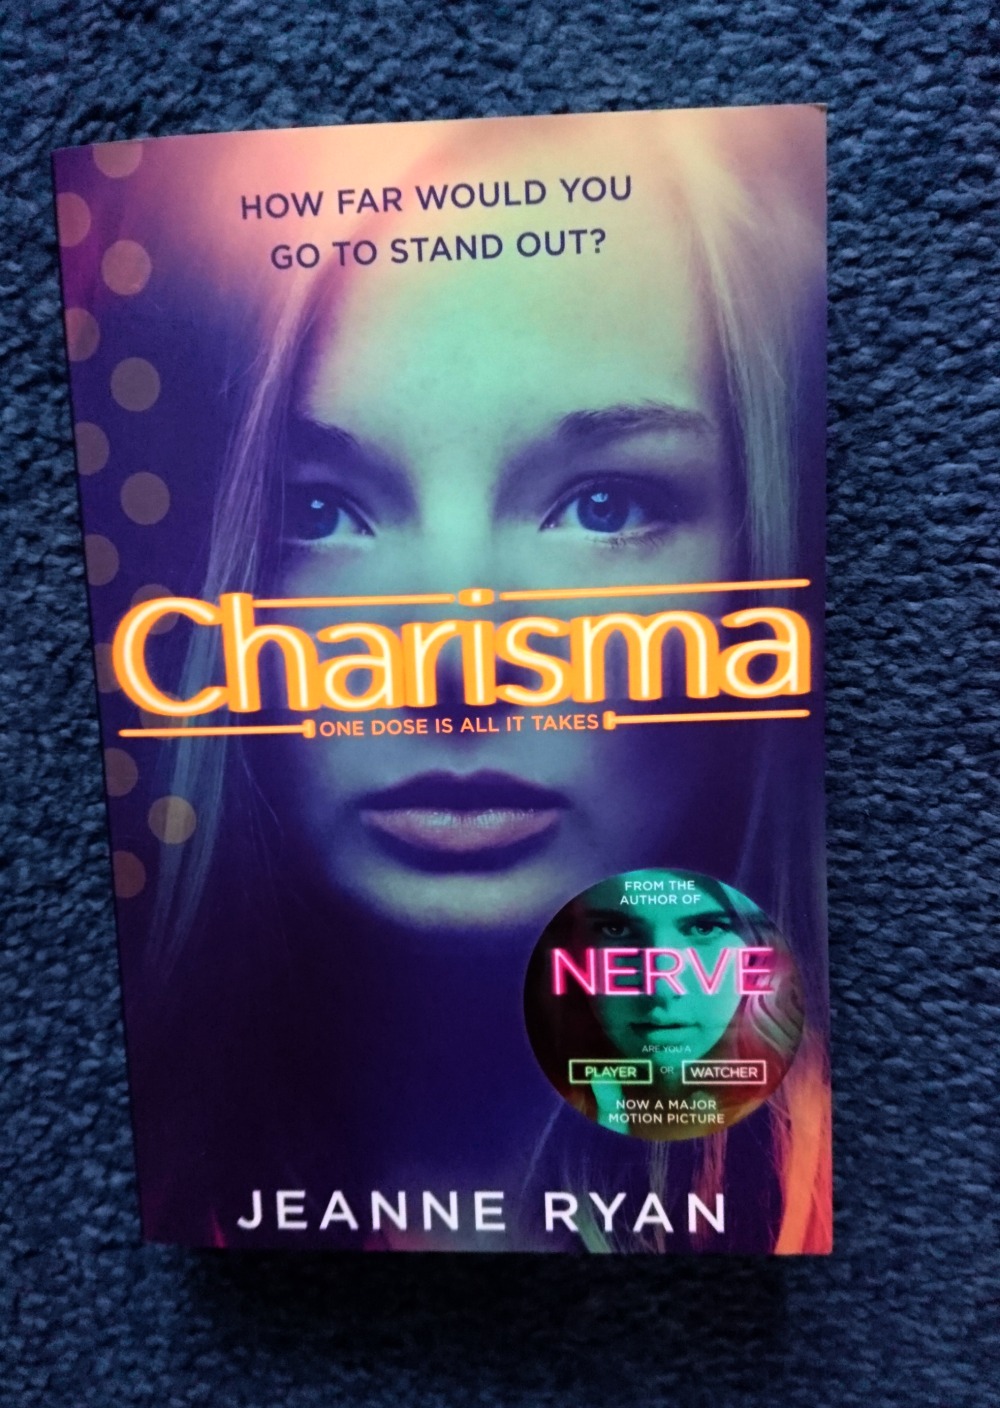 Charisma by Jeanne Ryan - book review